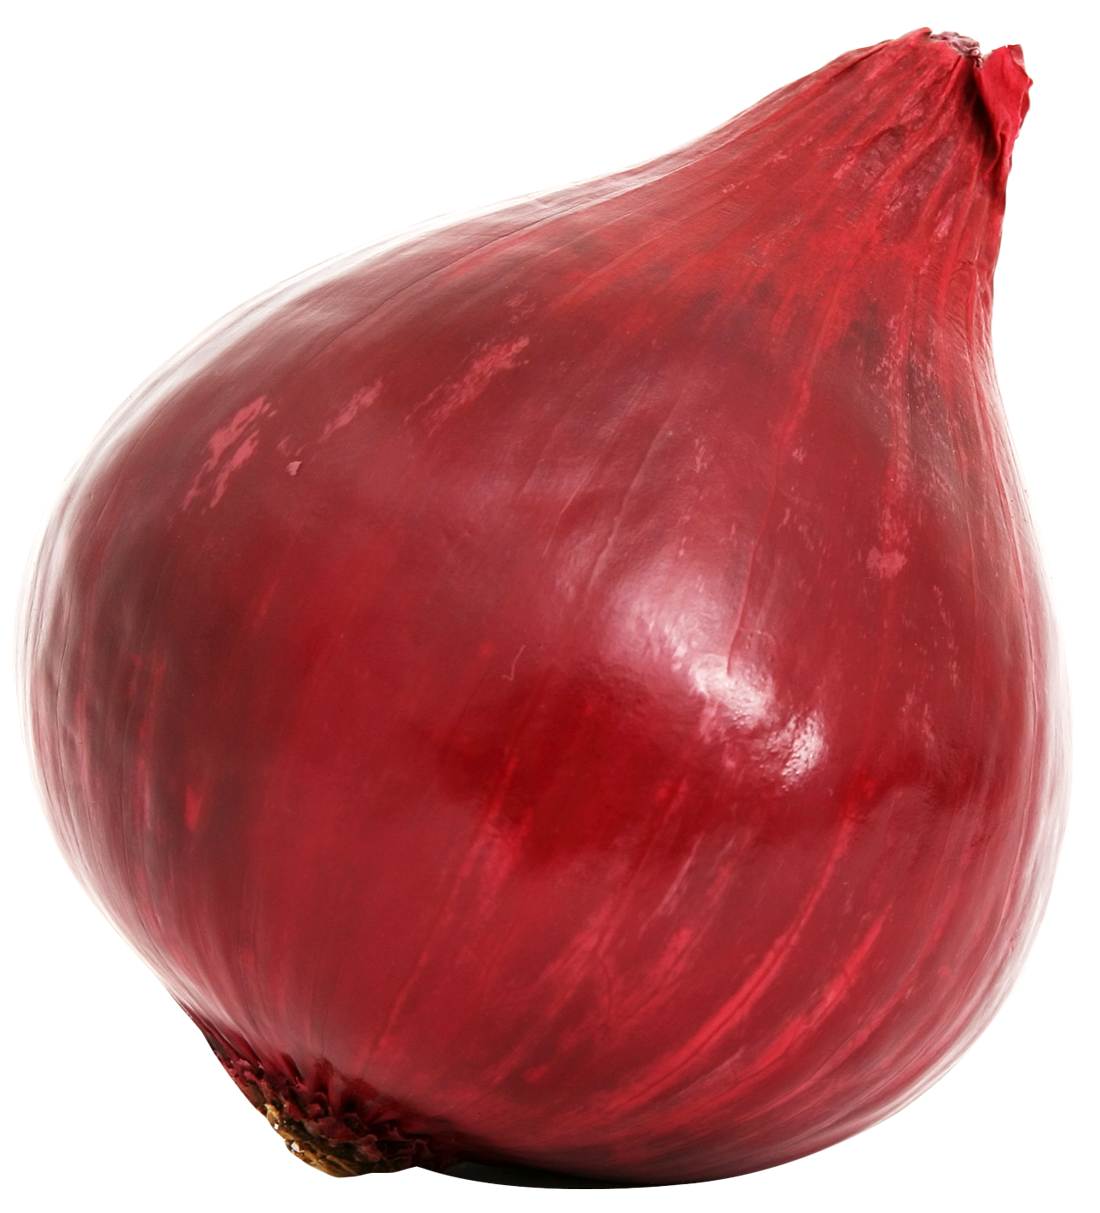 Red Onion Bulb Png Image - Onion, Transparent background PNG HD thumbnail